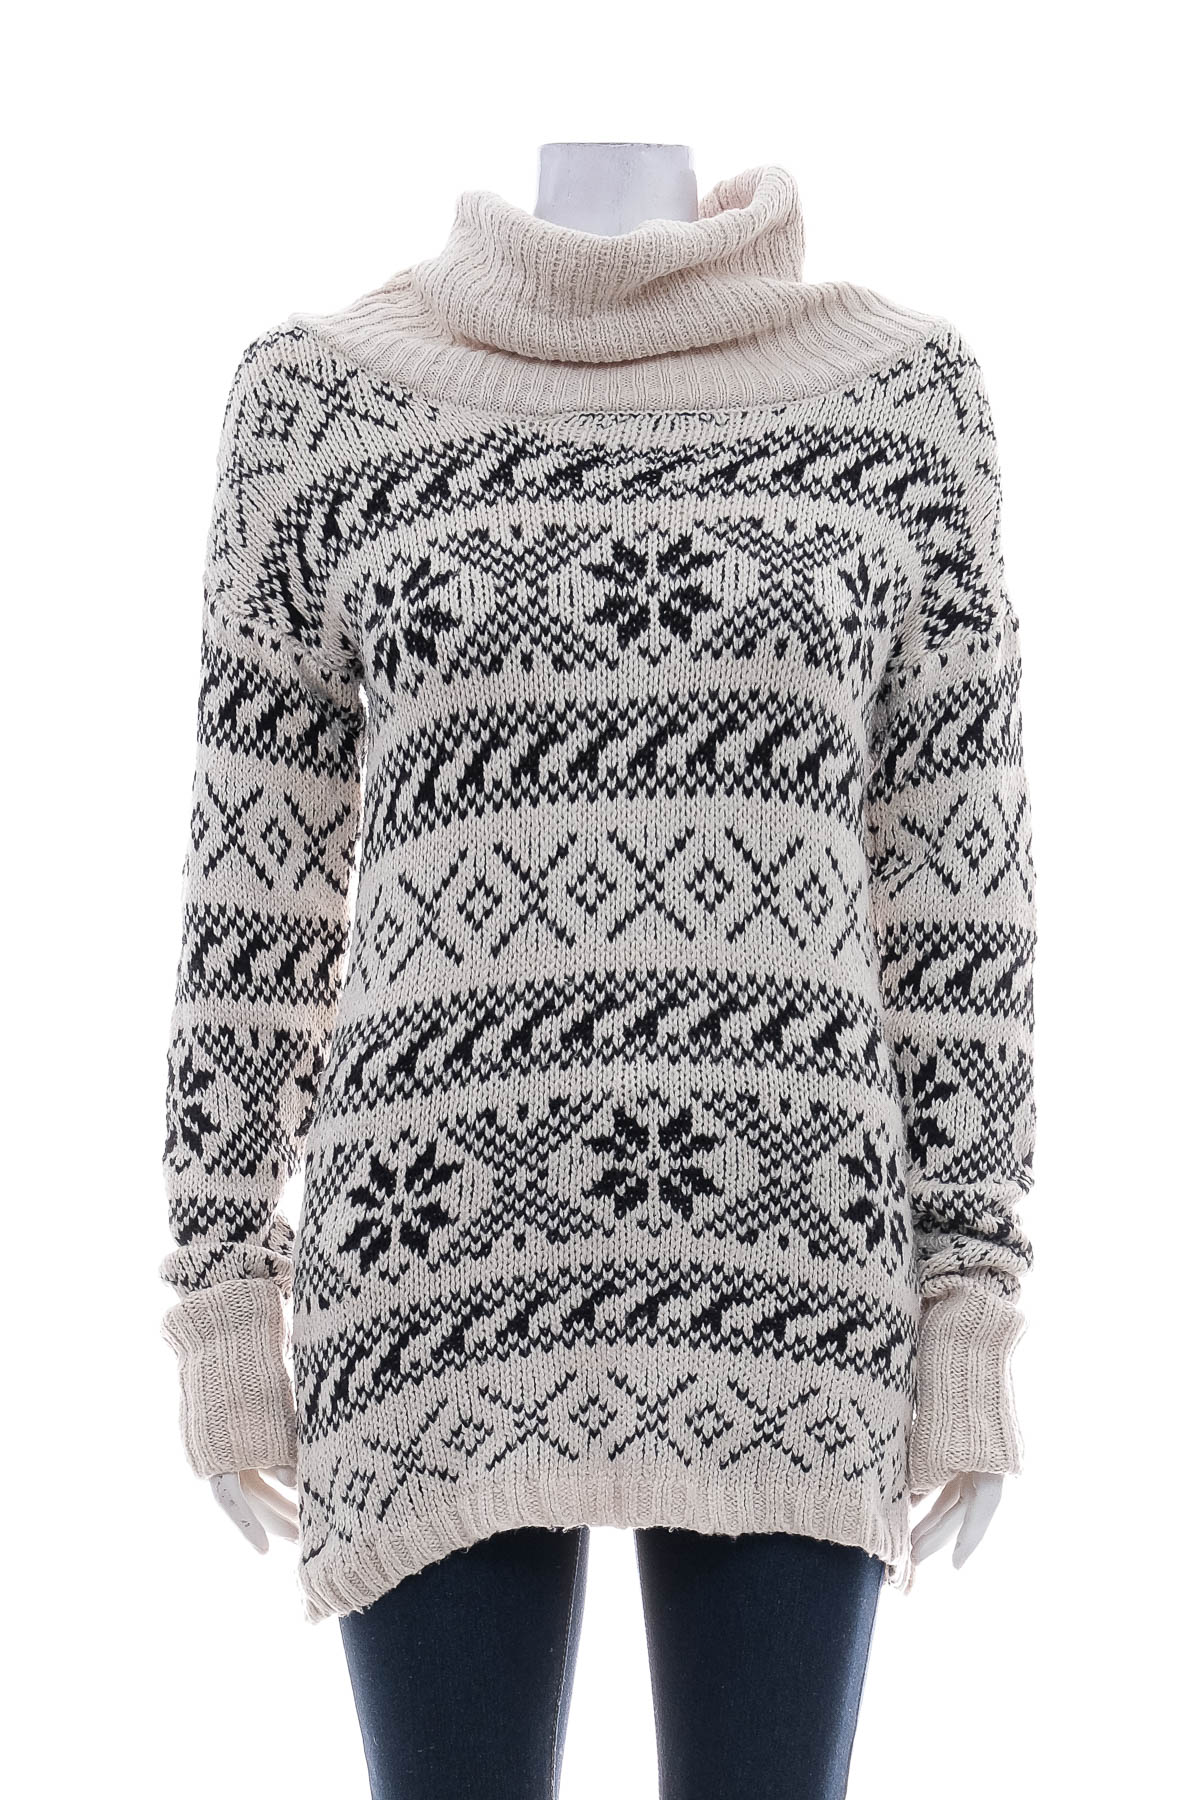 Women's sweater - maurices - 0